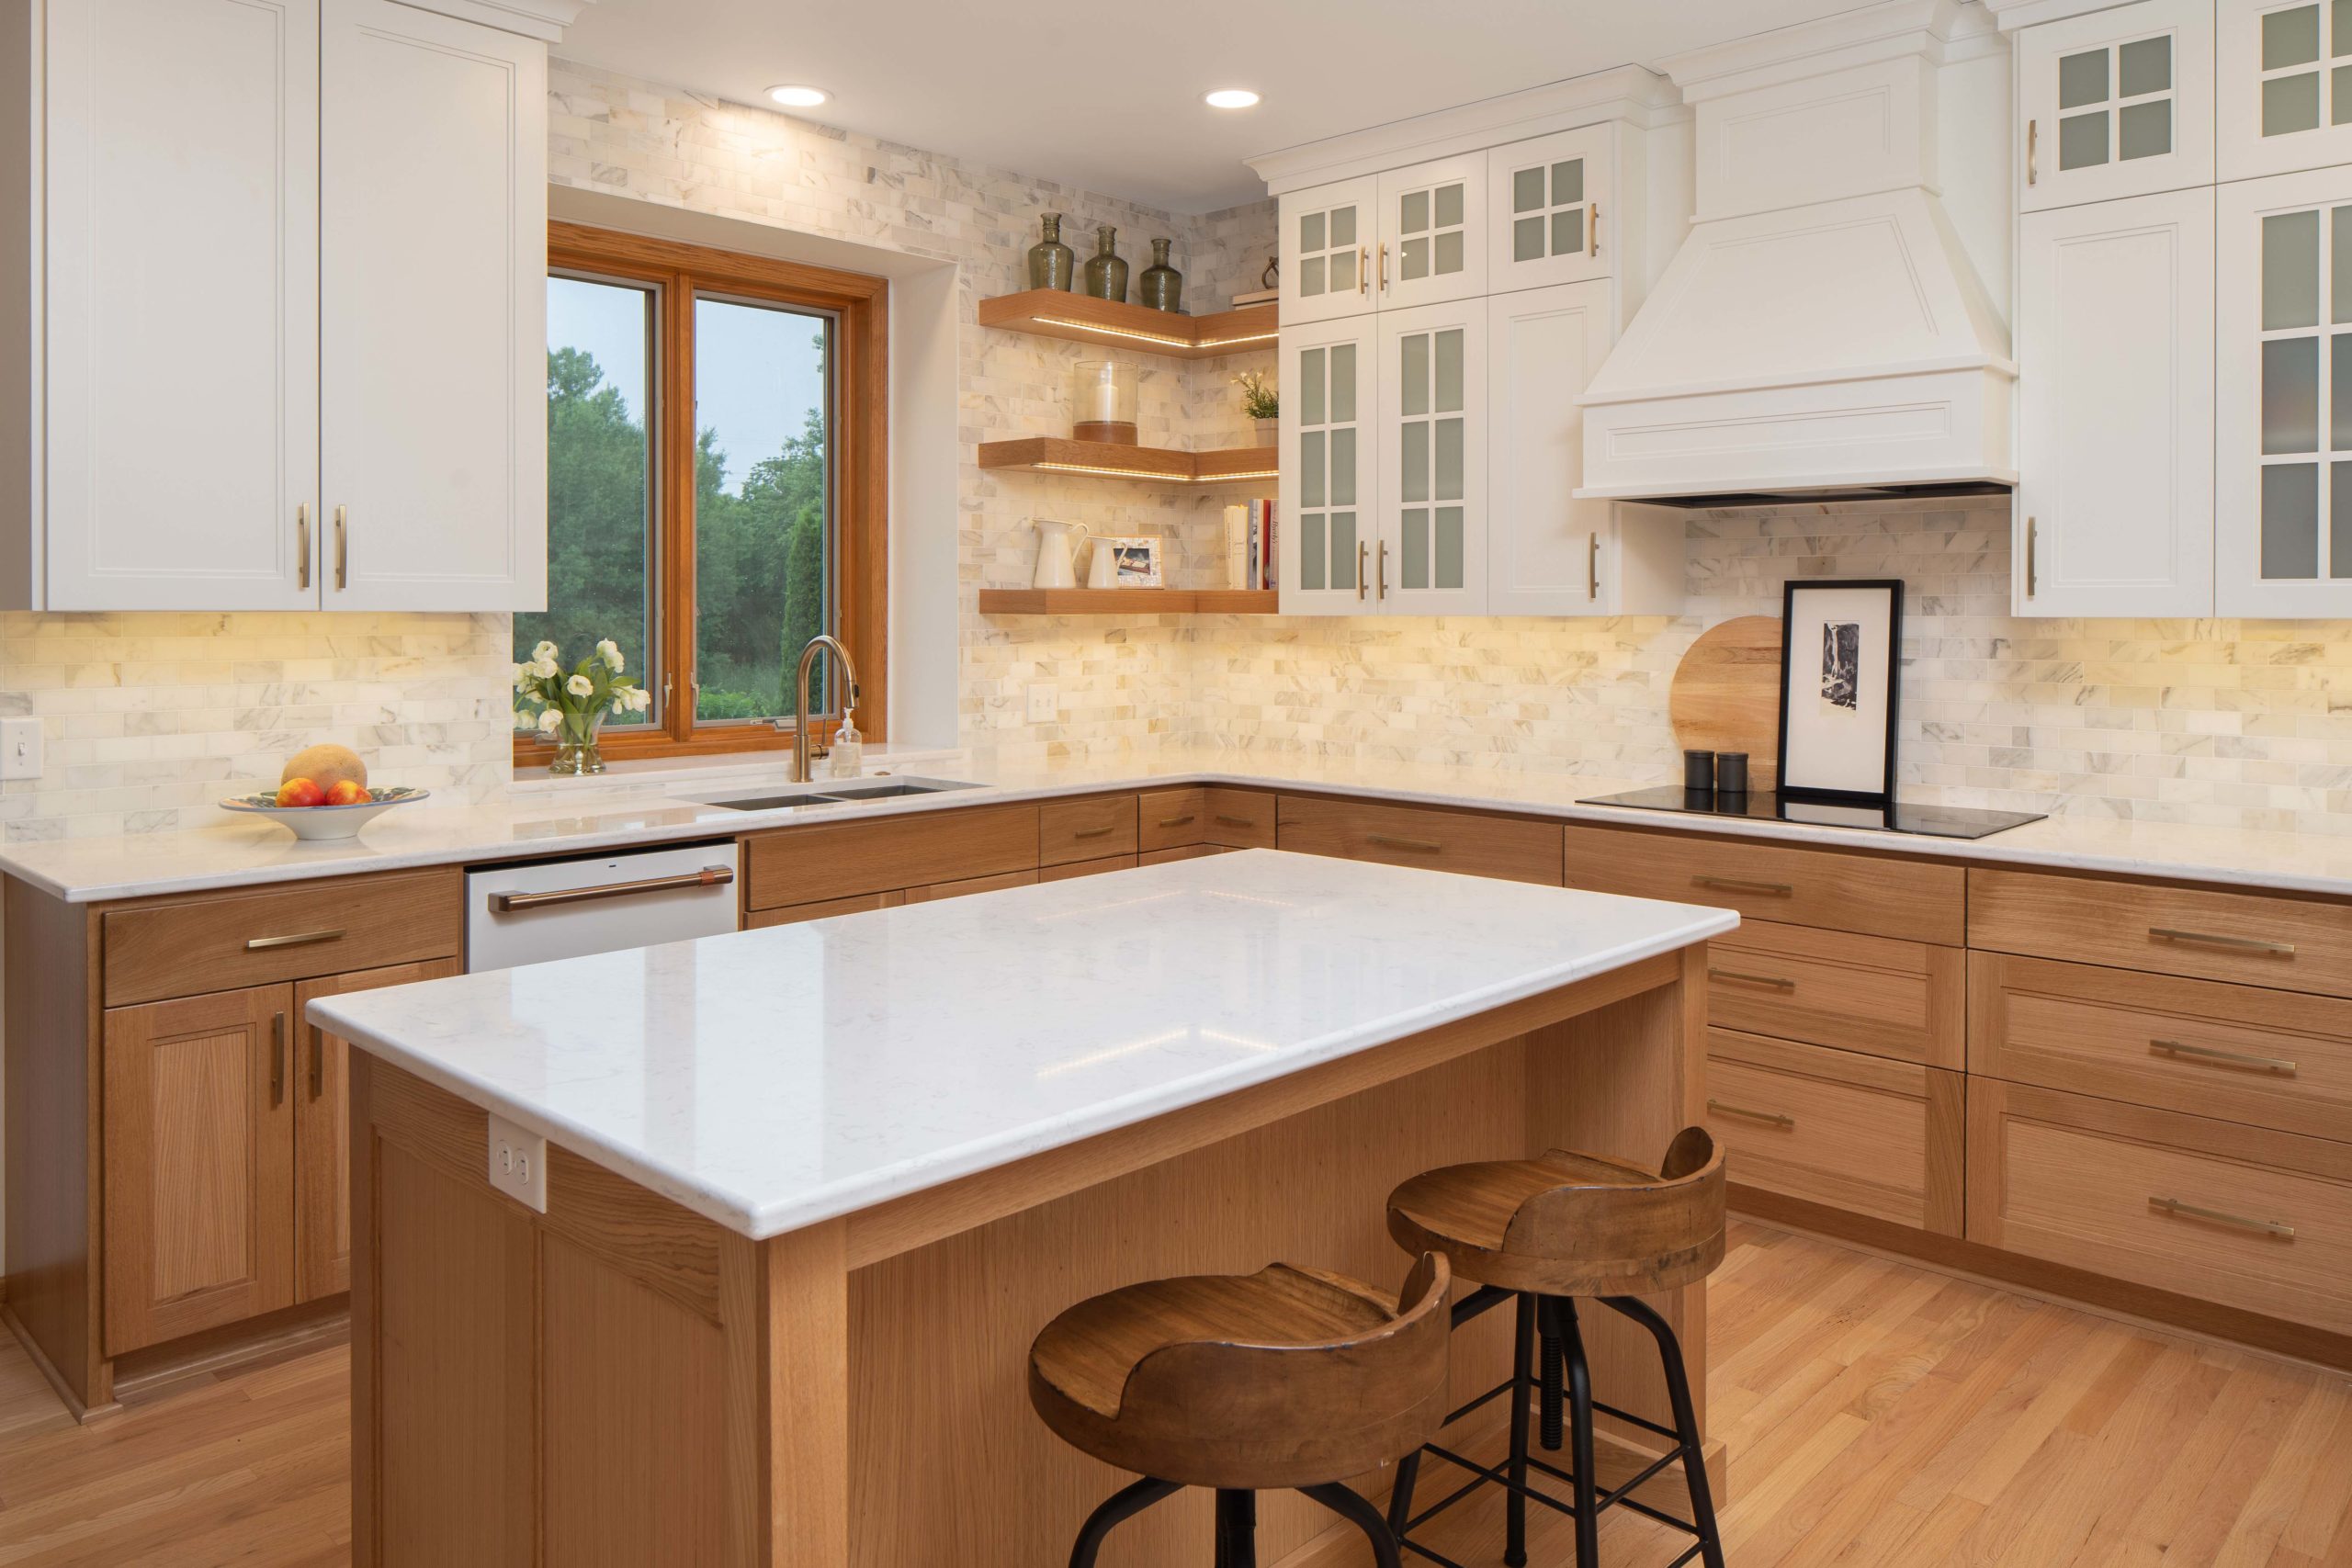 A kitchen with wood cabinets and a center island undergoing a kitchen remodel.